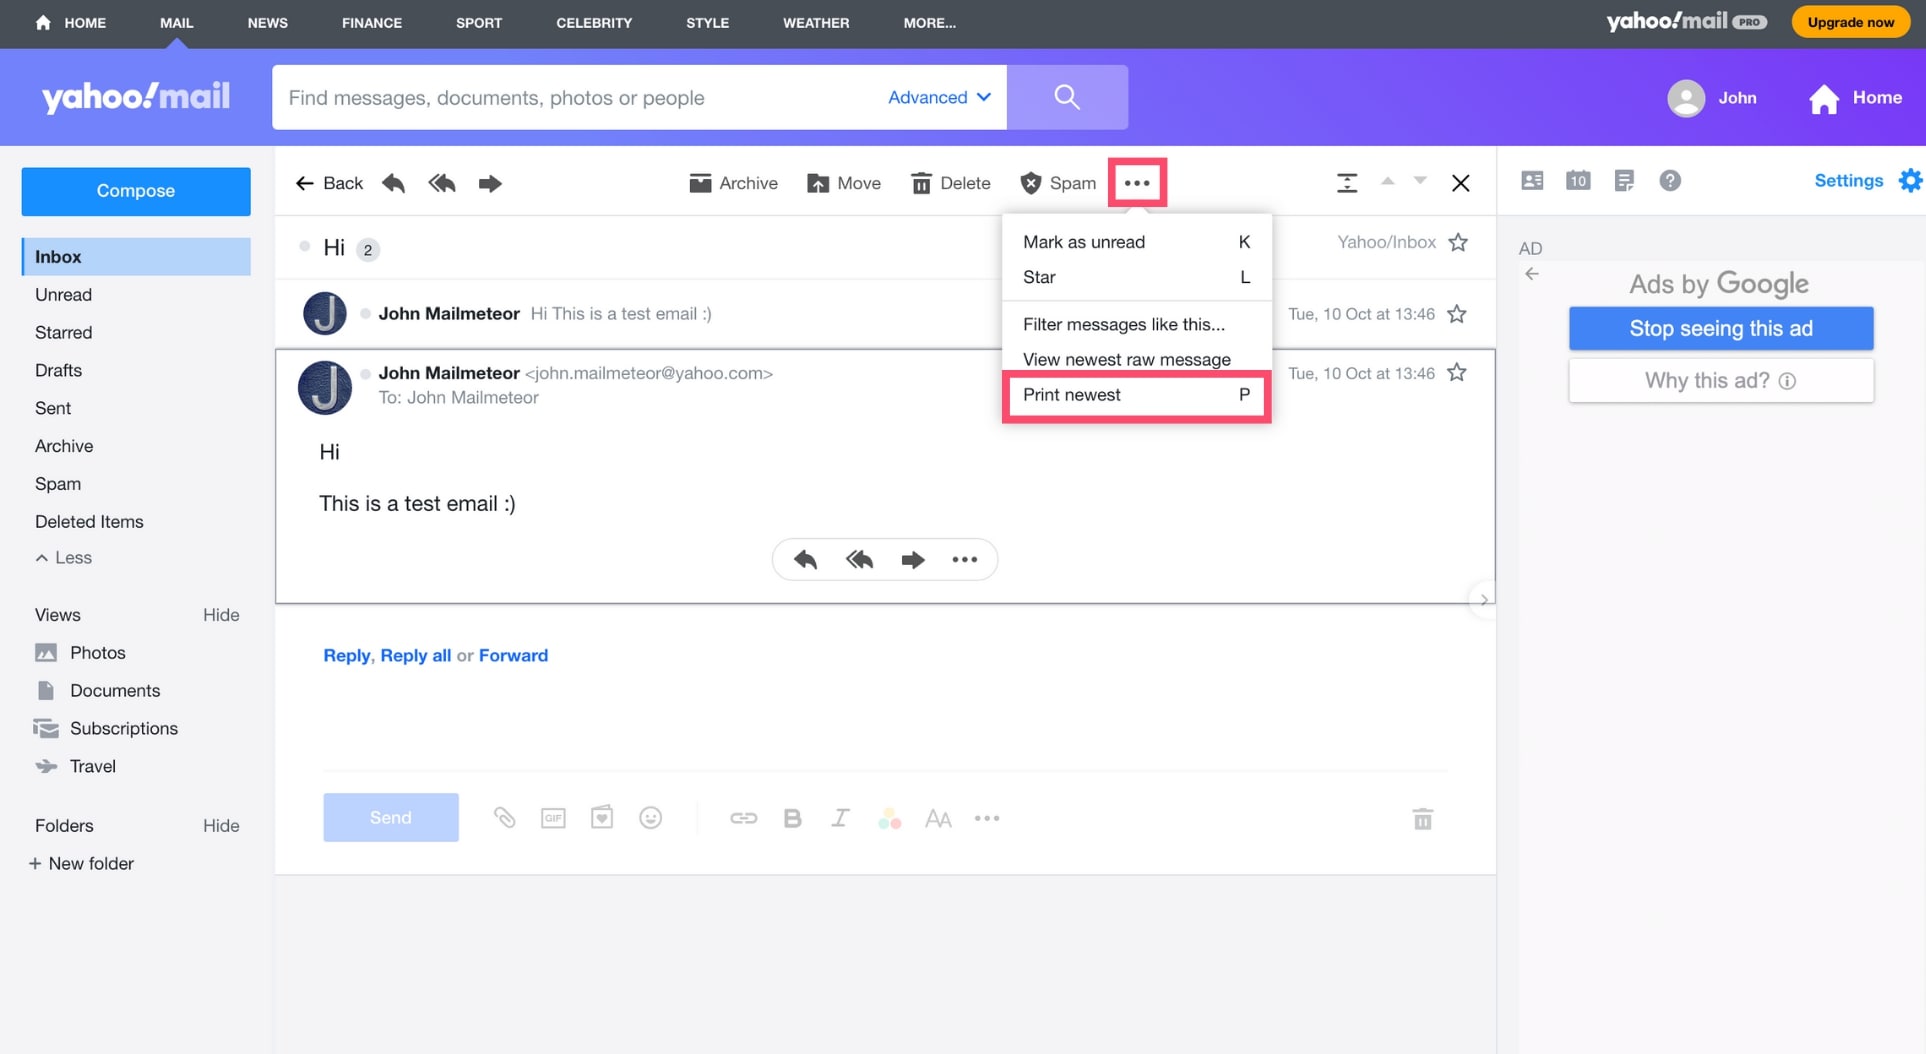 The print feature in Yahoo Mail